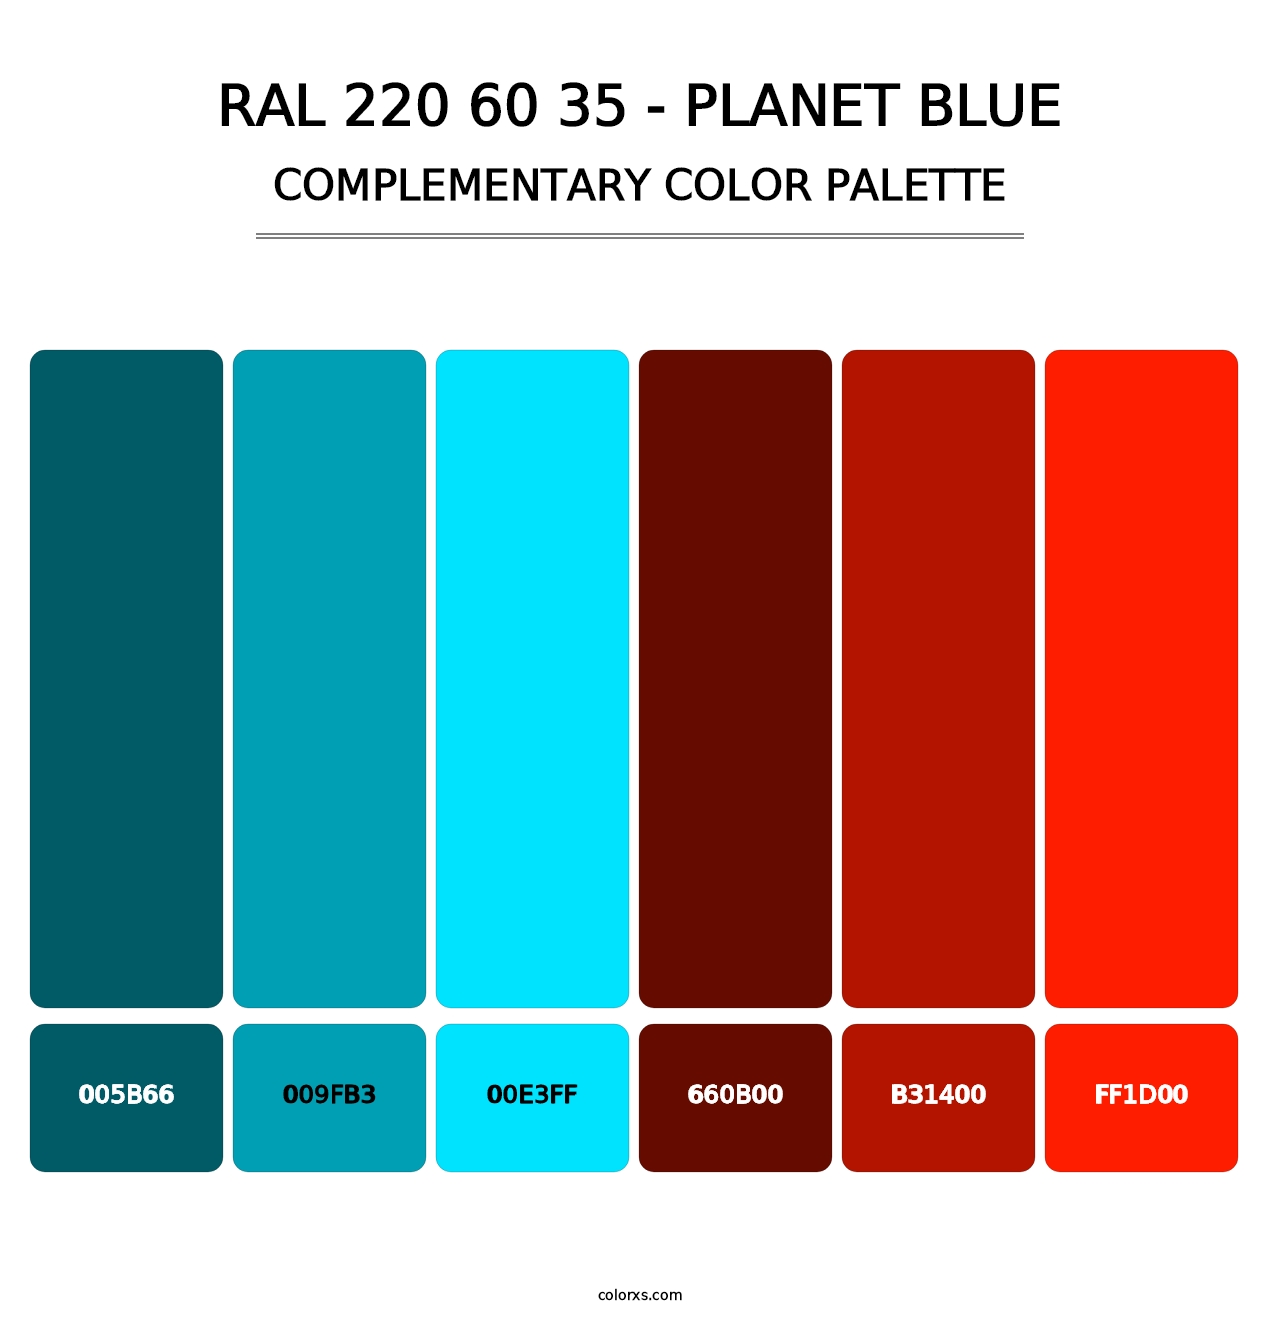 RAL 220 60 35 - Planet Blue - Complementary Color Palette